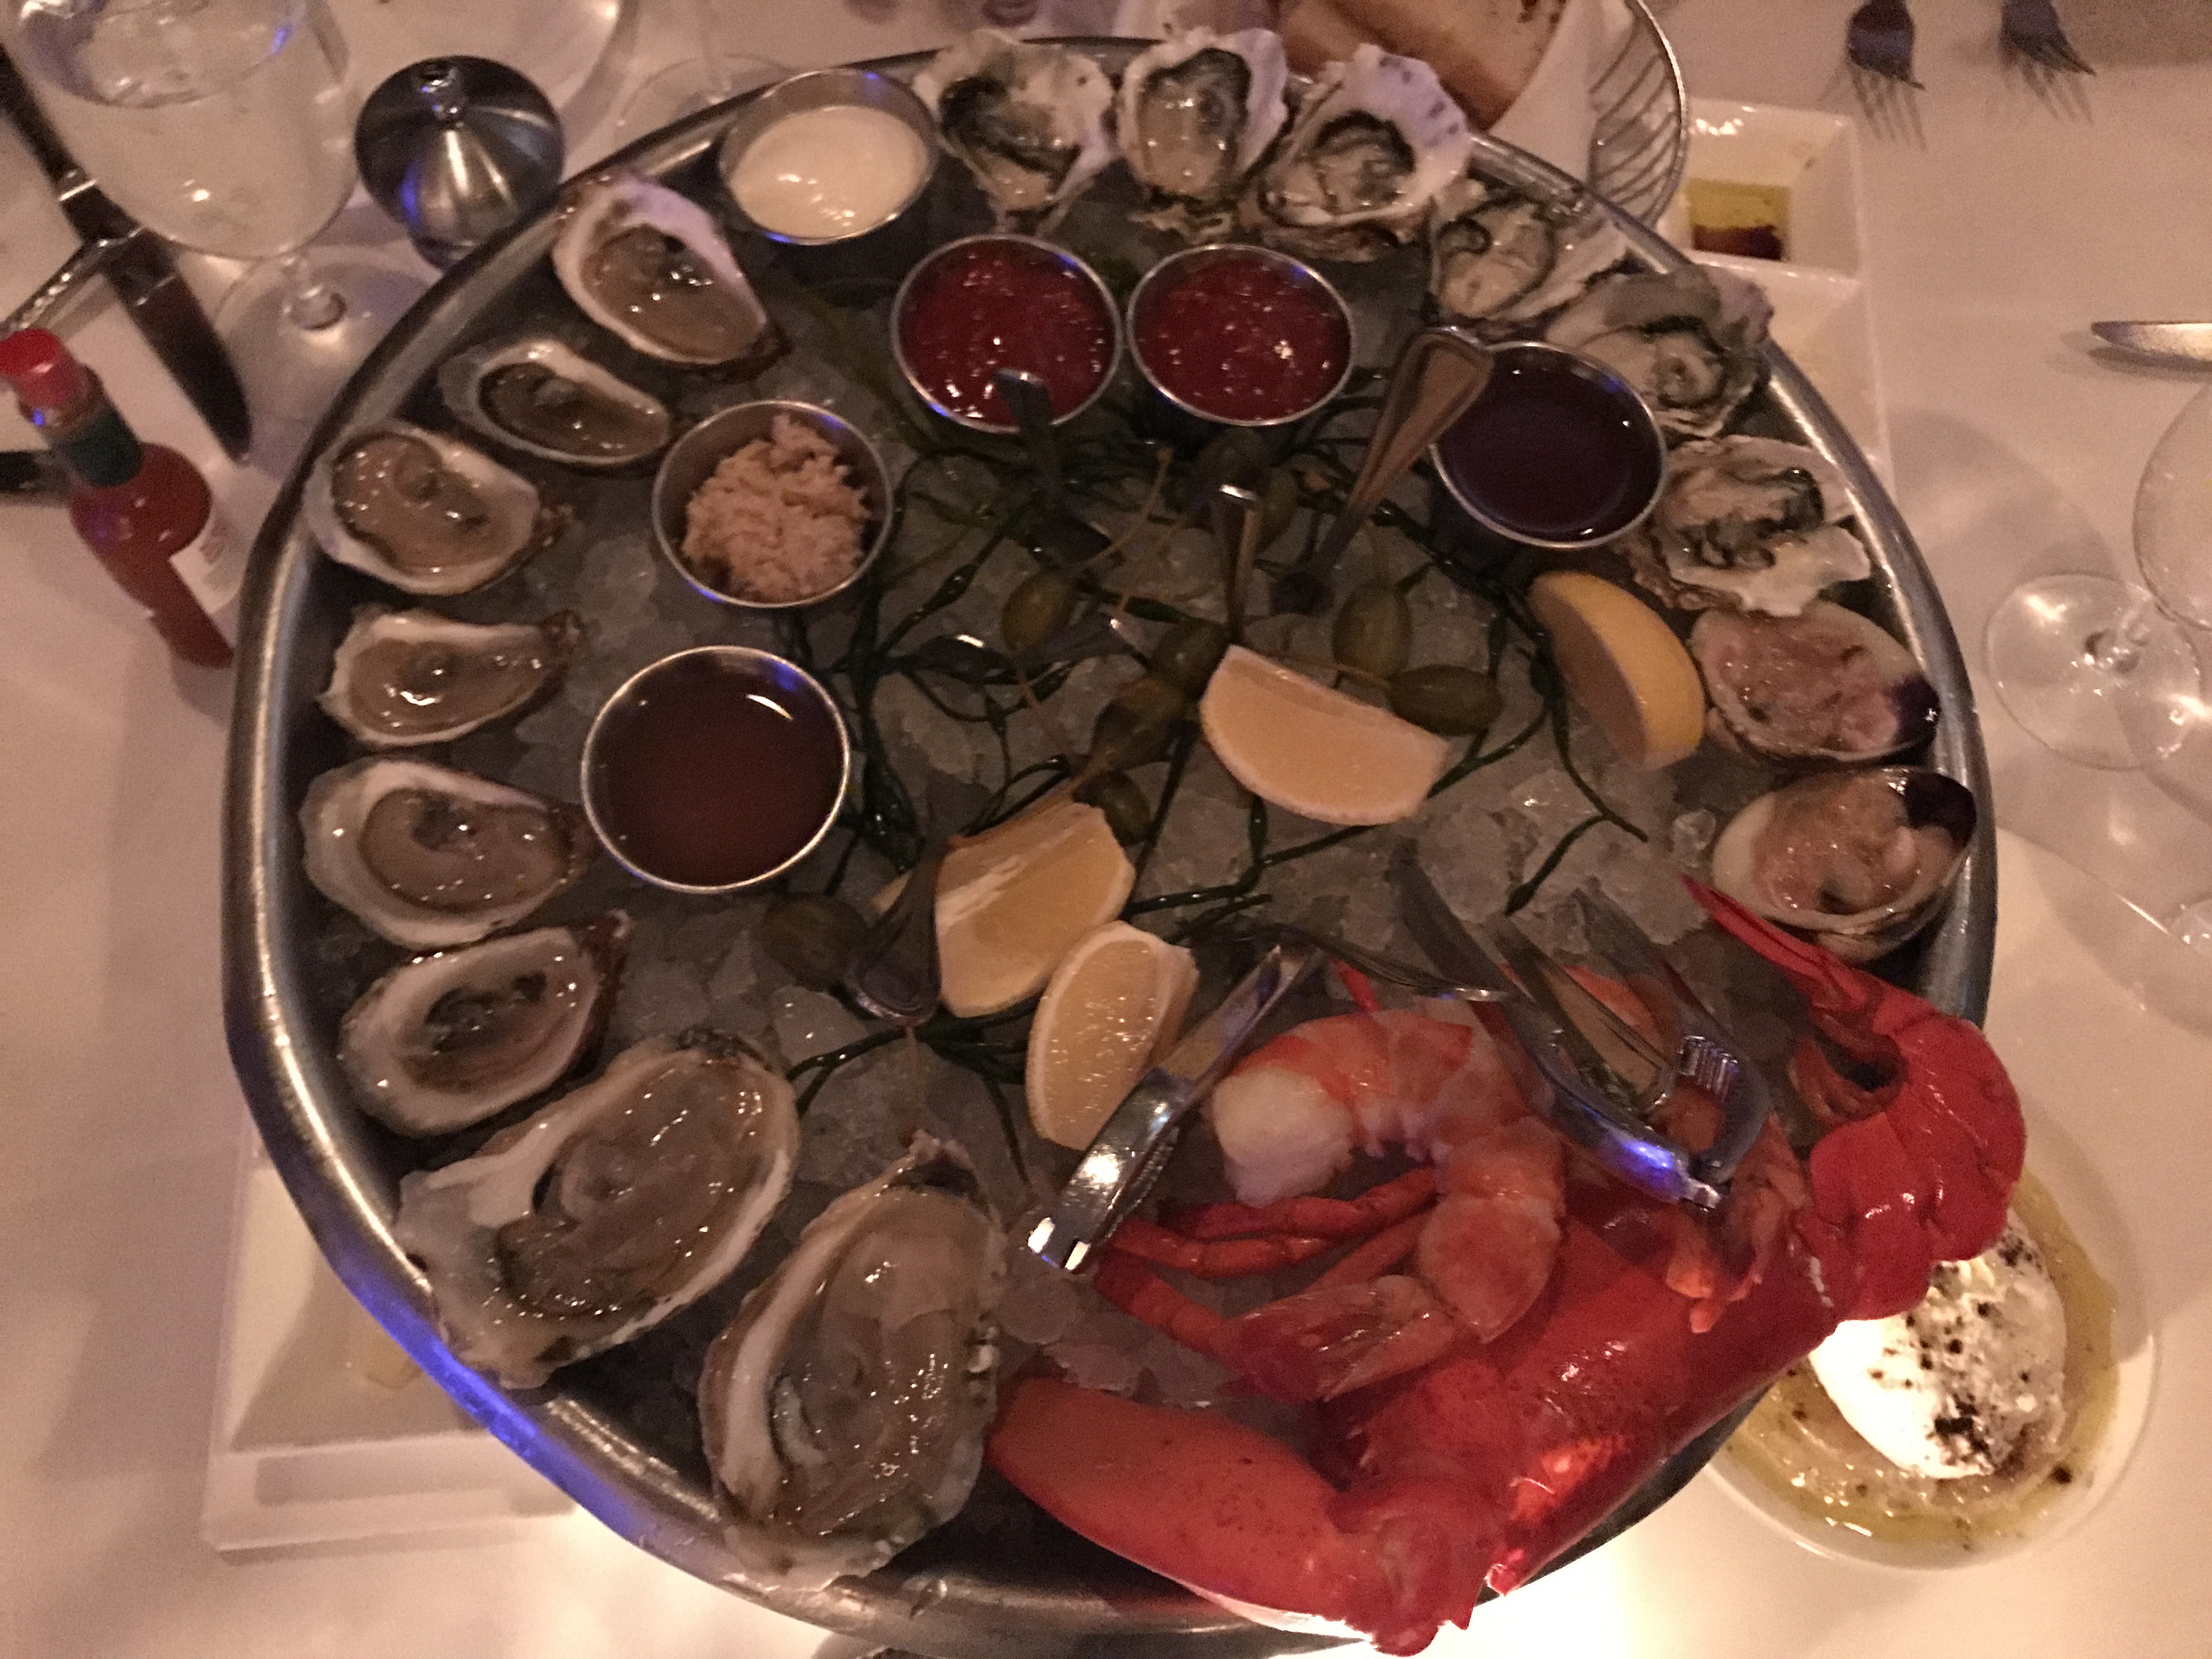 Have a nice seafood meal in Manhattan - iTravela